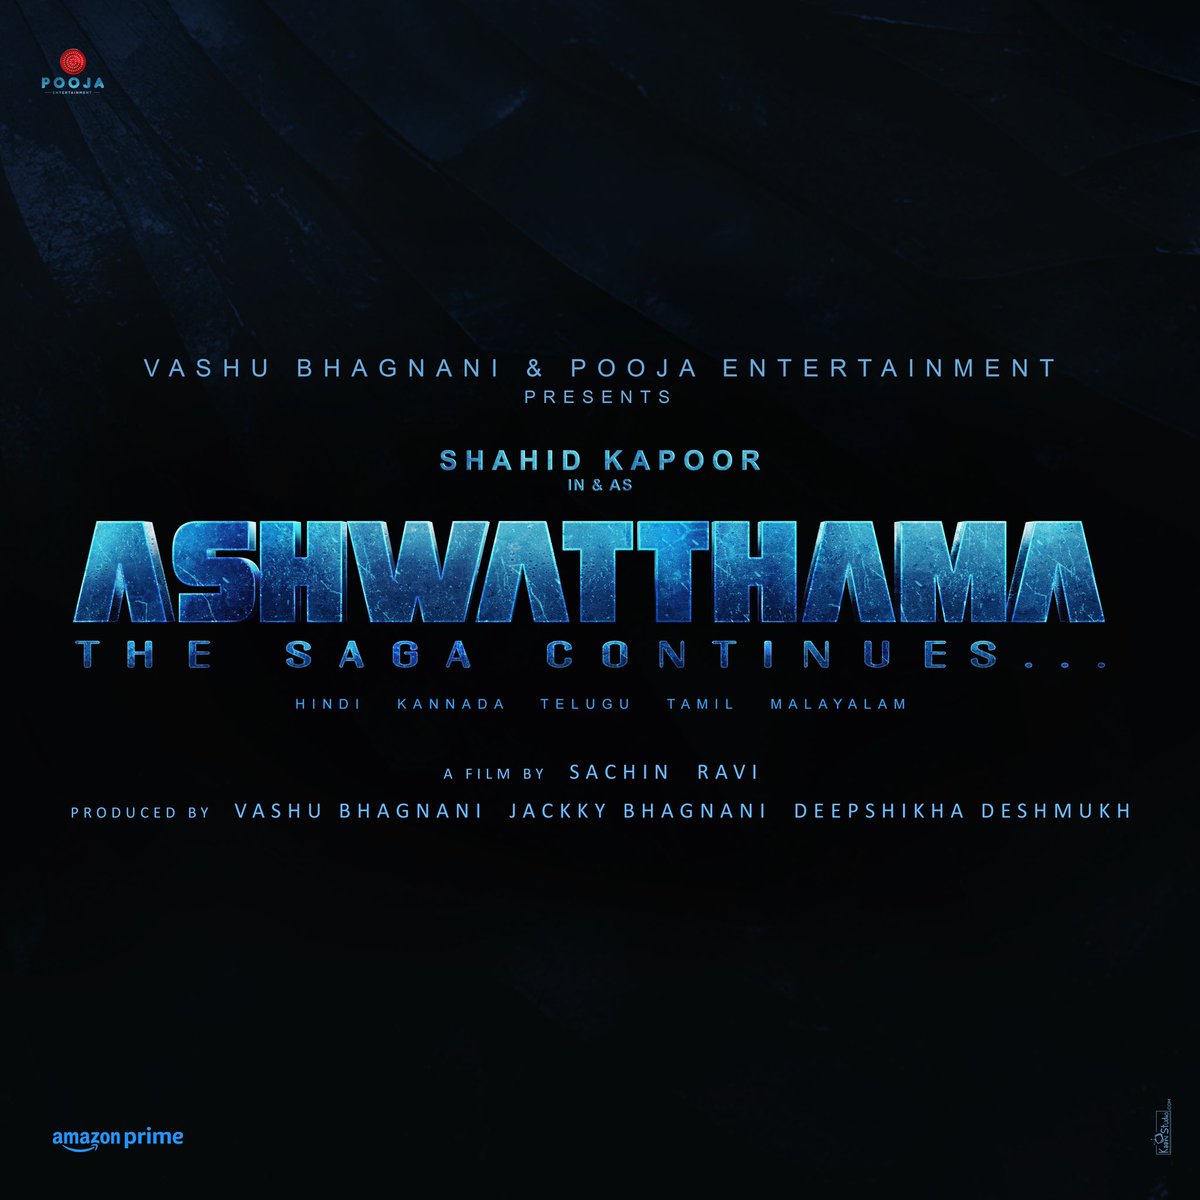 Myth and reality will blur, as past and present collide, when an ancient legend meets this modern marvel! This is the story of #AshwatthamaTheSagaContinues, the immortal warrior a Magnum Opus you can not miss @vashubhagnani @jackkybhagnani @SachinBRavi @honeybhagnani